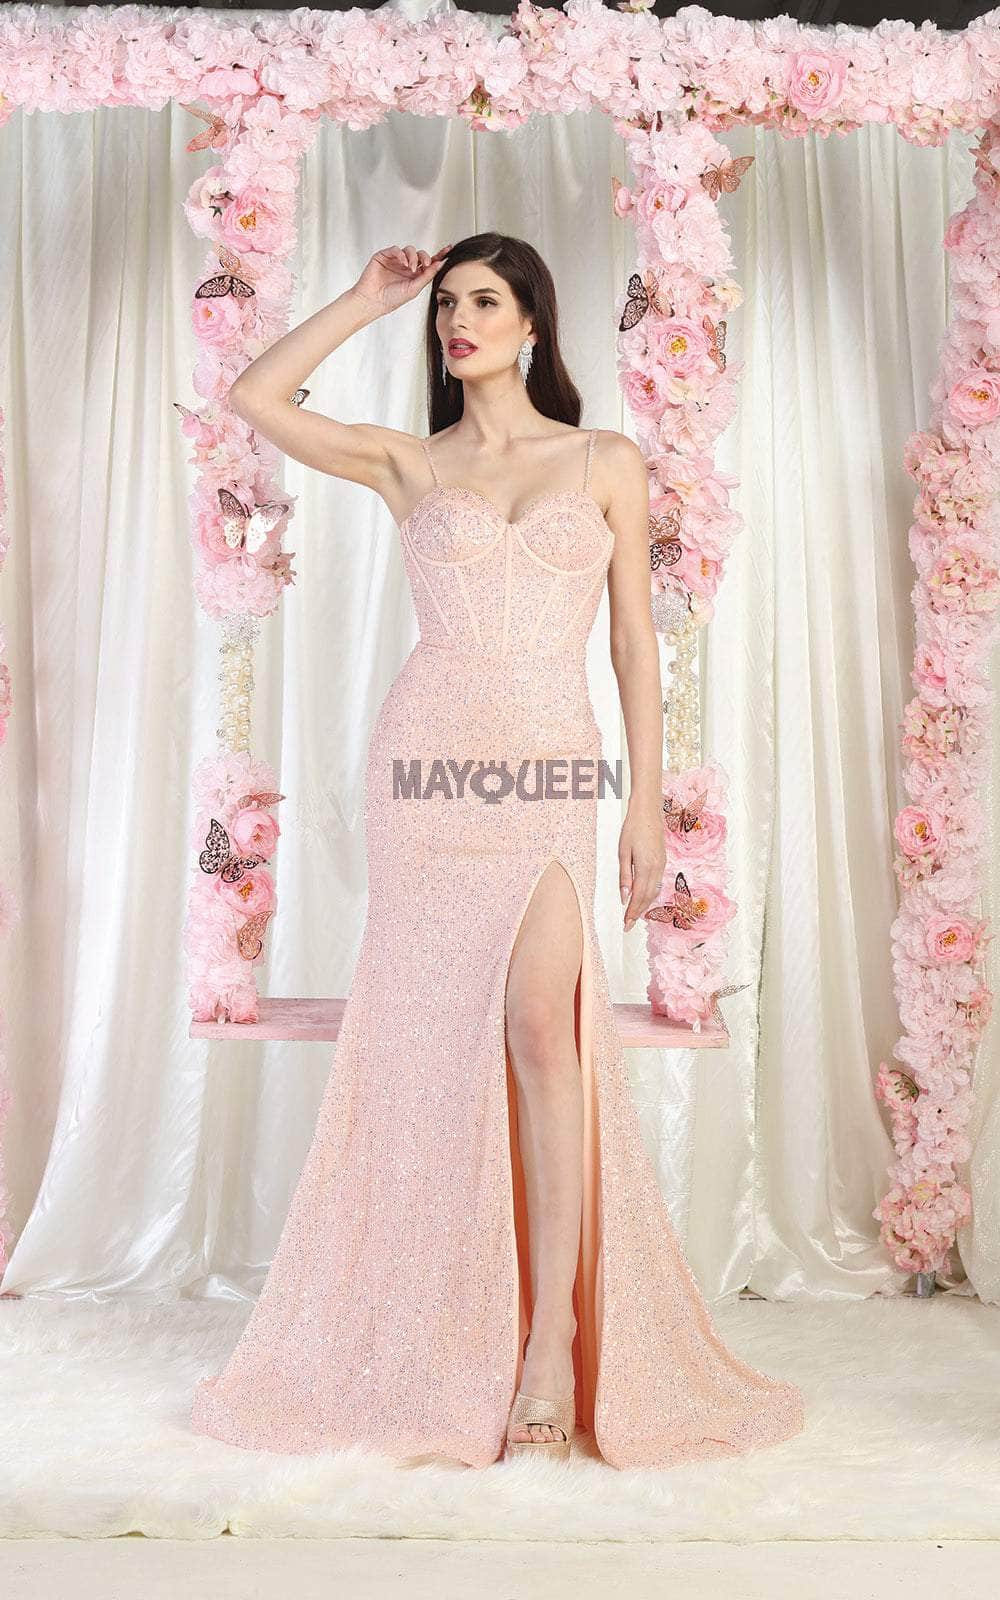 May Queen RQ7981 - Sleeveless Sequin Embellished Evening Dress Special Occasion Dress